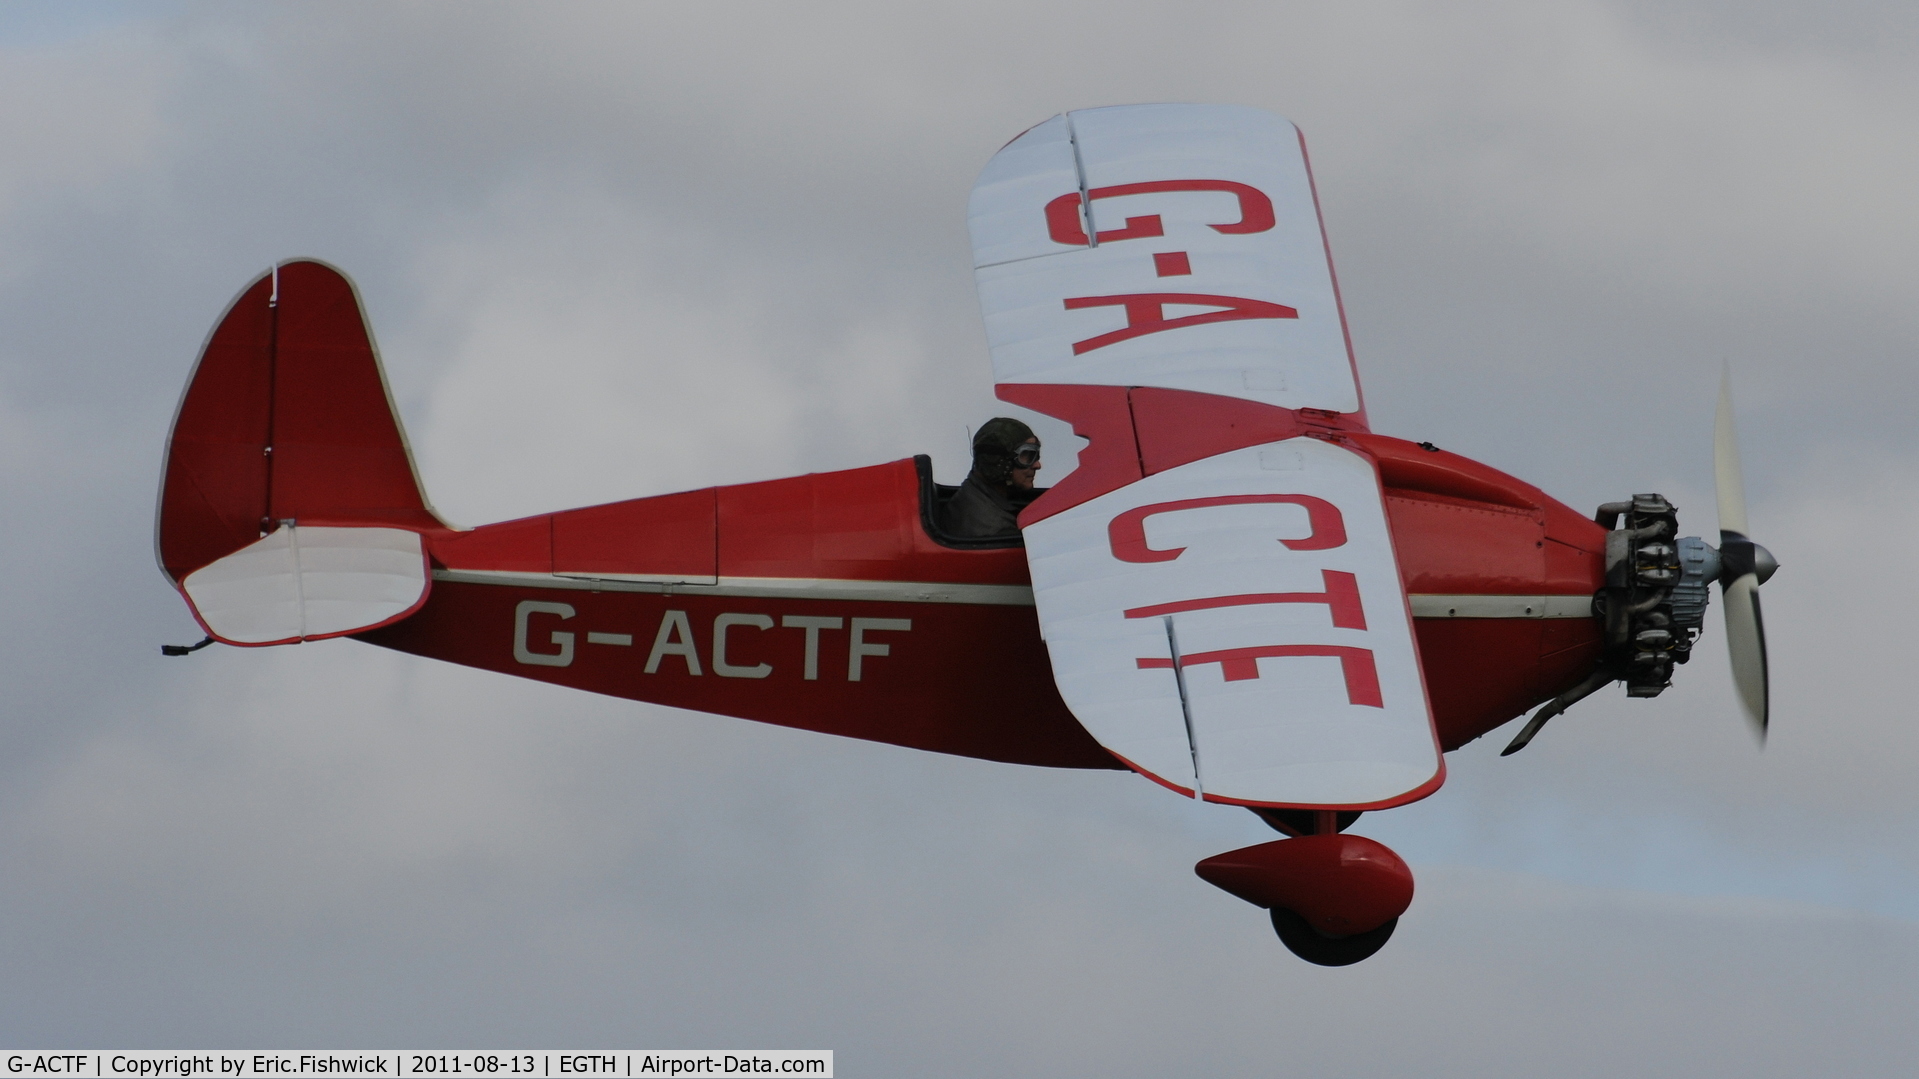 G-ACTF, 1932 Comper CLA-7 Swift C/N S32/9, 42. G-ACTF at Shuttleworth Evening Air Display, August 2011